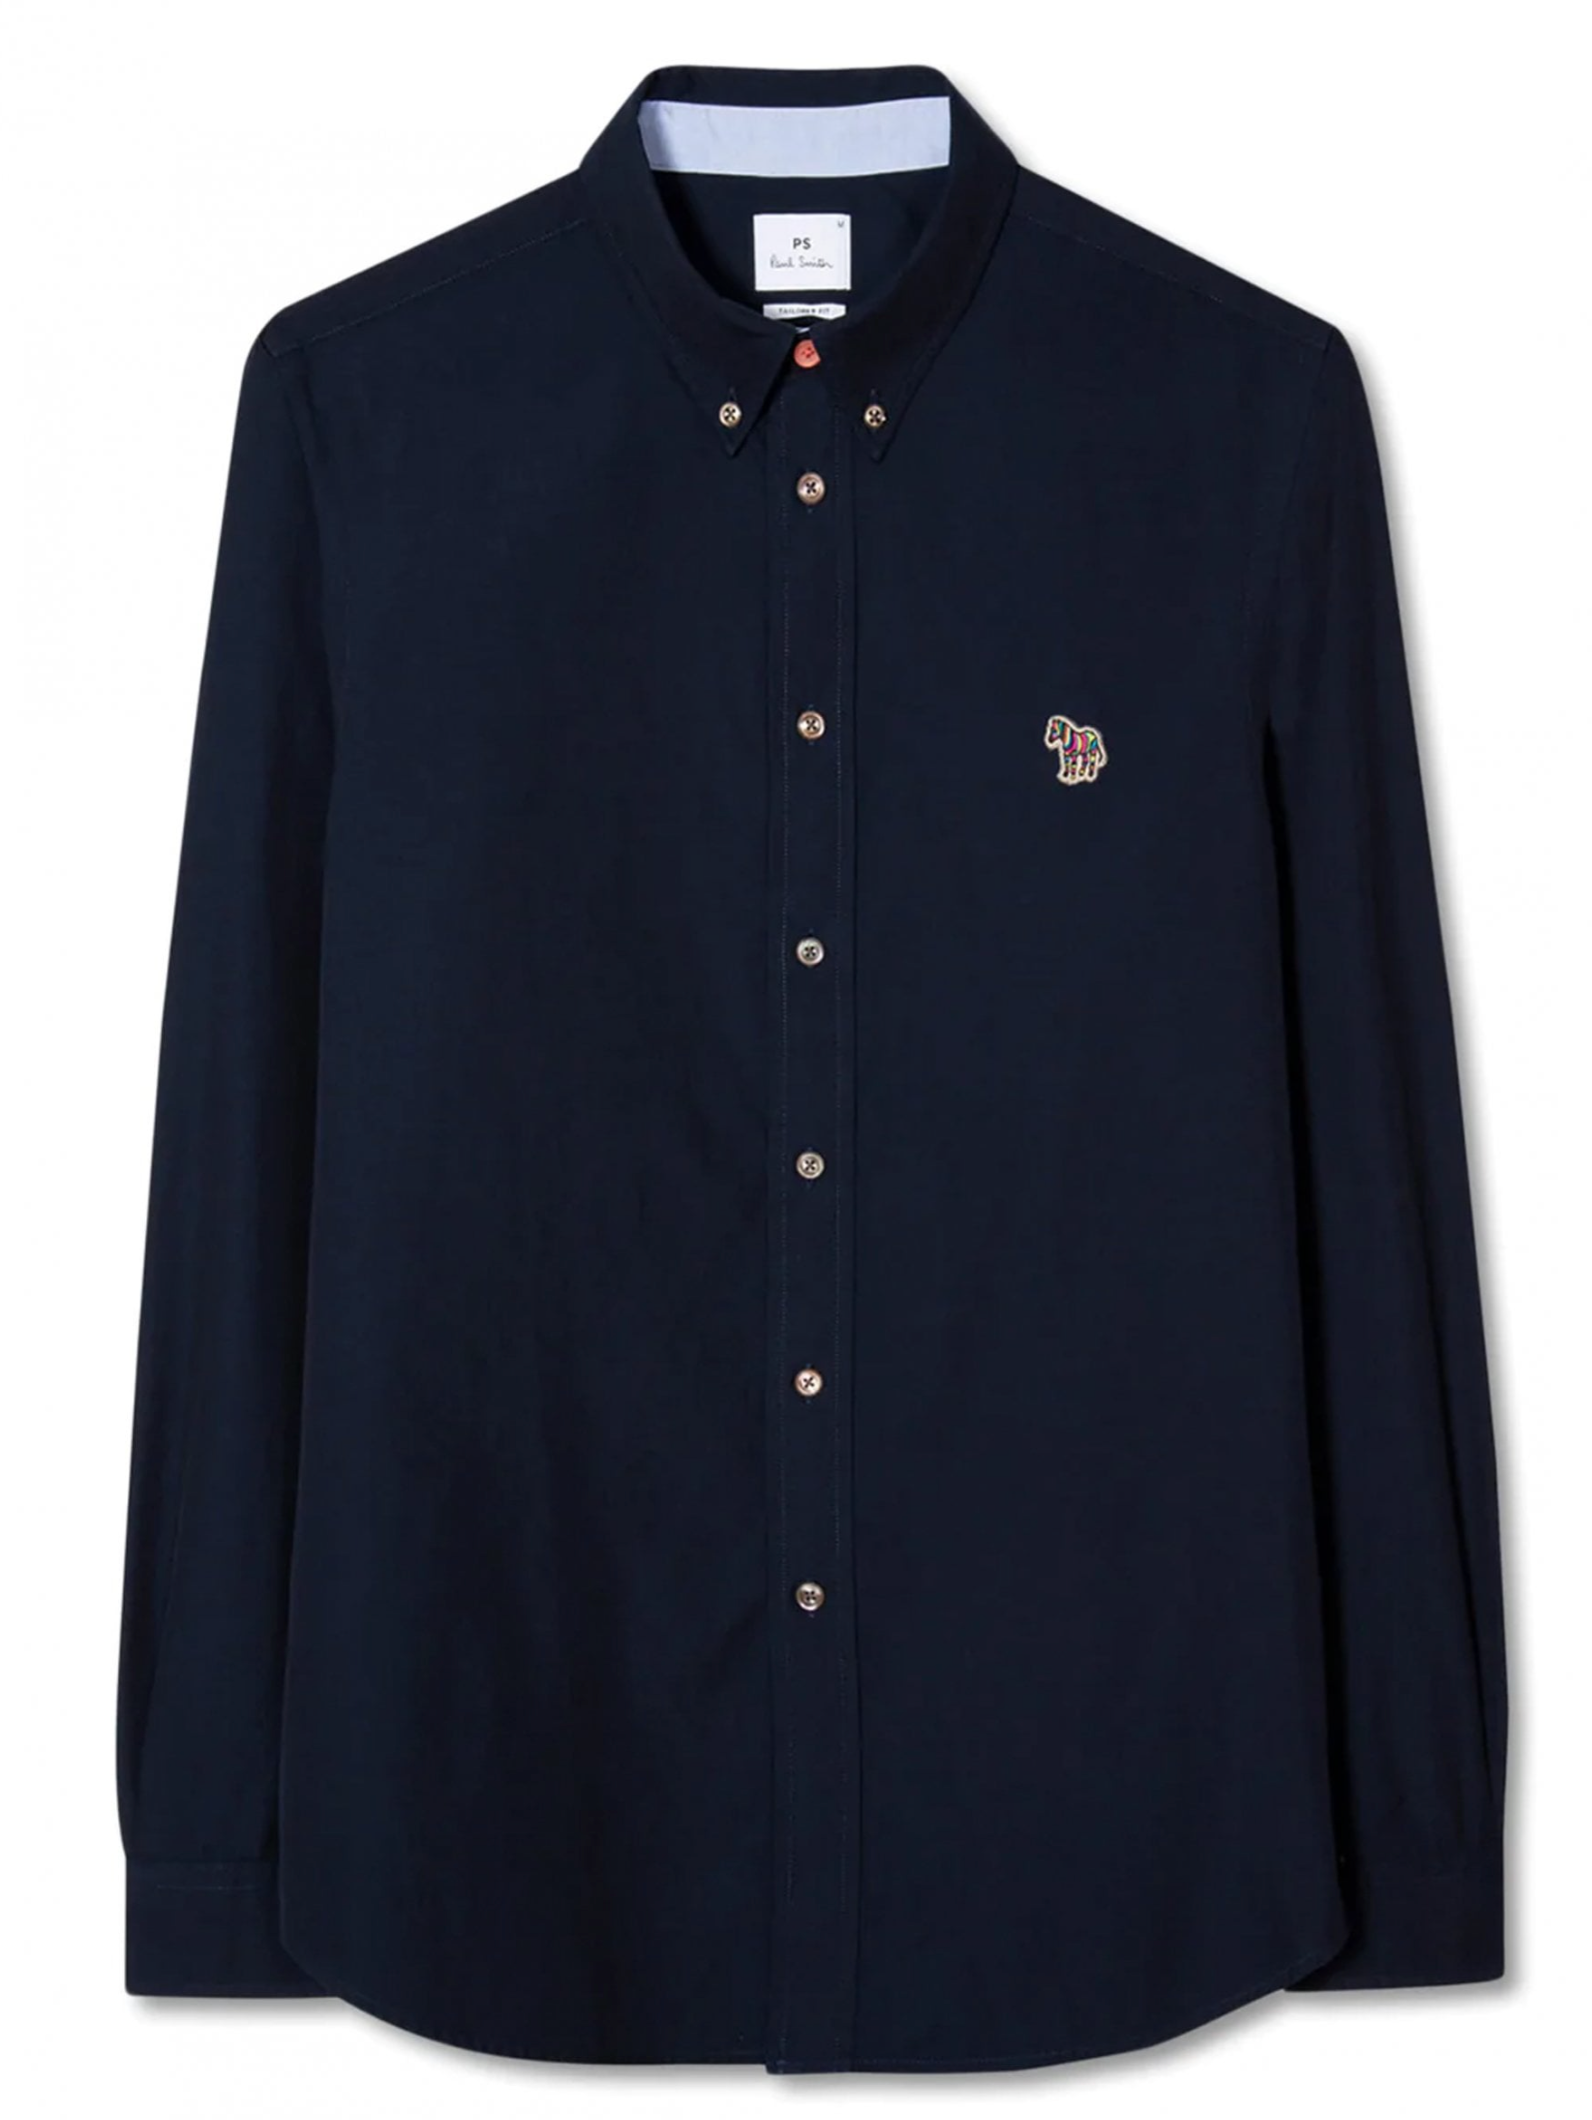 PS by Paul Smith Tailored Shirt Zebra Navy